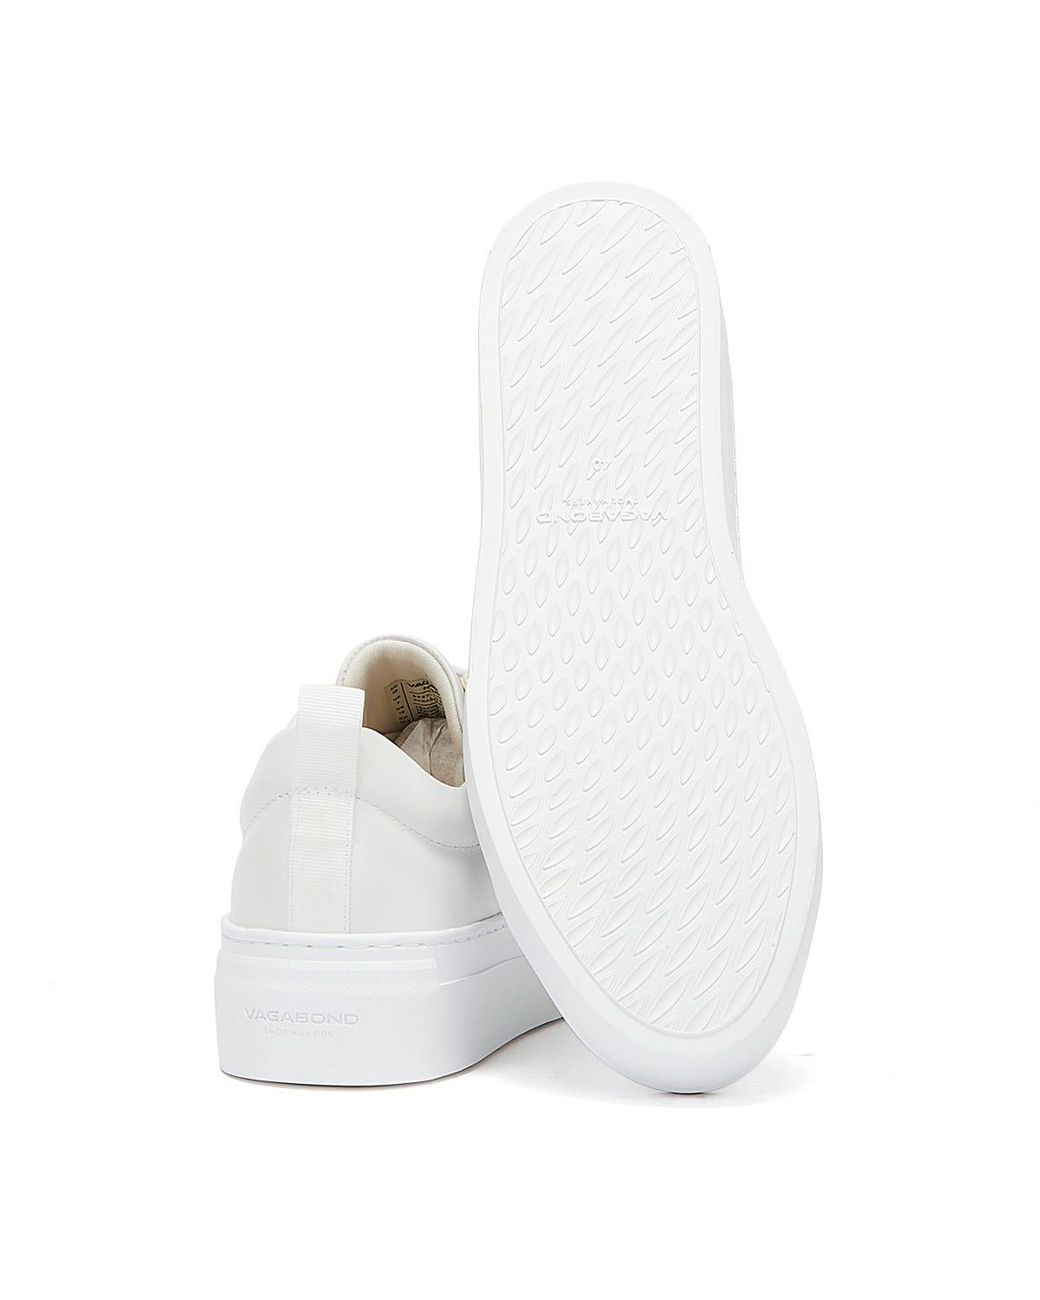 Vagabond Shoemakers Zoe Platform Lace Up Trainers in White | Lyst